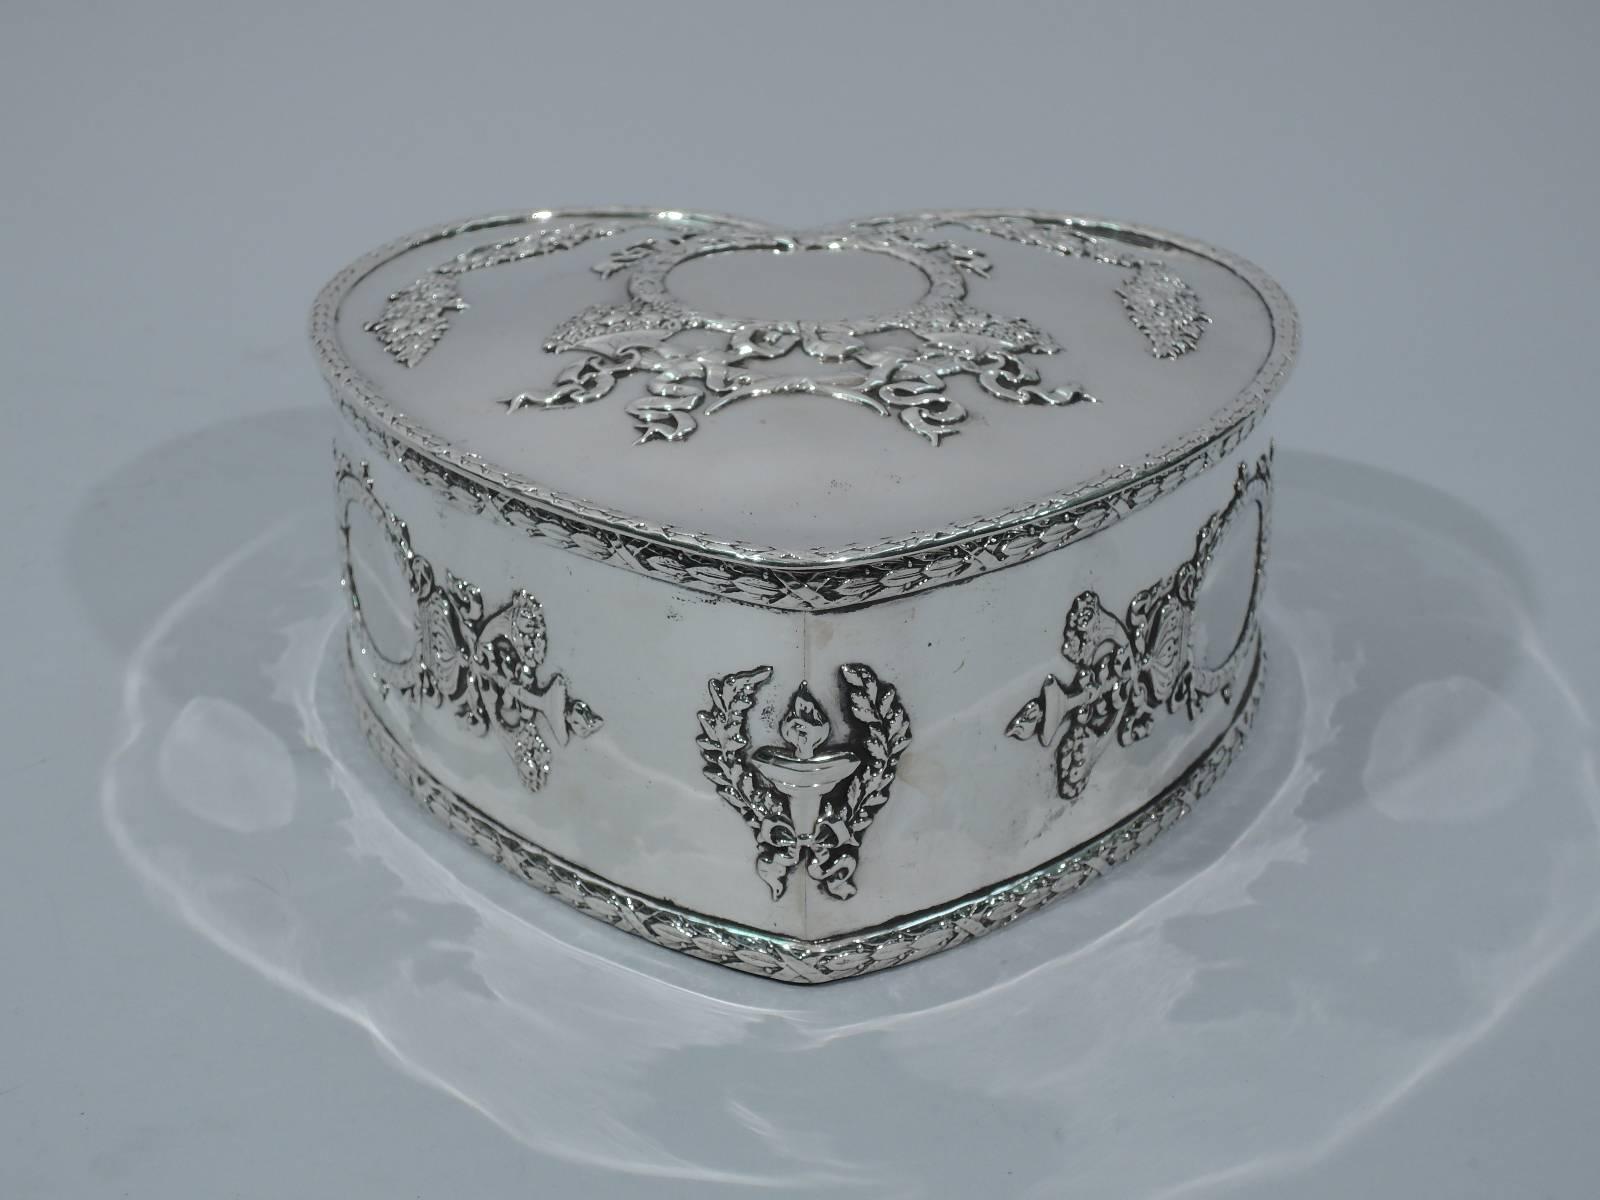 Regal and romantic sterling silver heart box. Made by Howard in New York in 1897. Heart form with hinged cover. Ornament includes garlands and ribbon applied to sides and cover. Also, three crowned cartouches (vacant). Hallmark includes date and